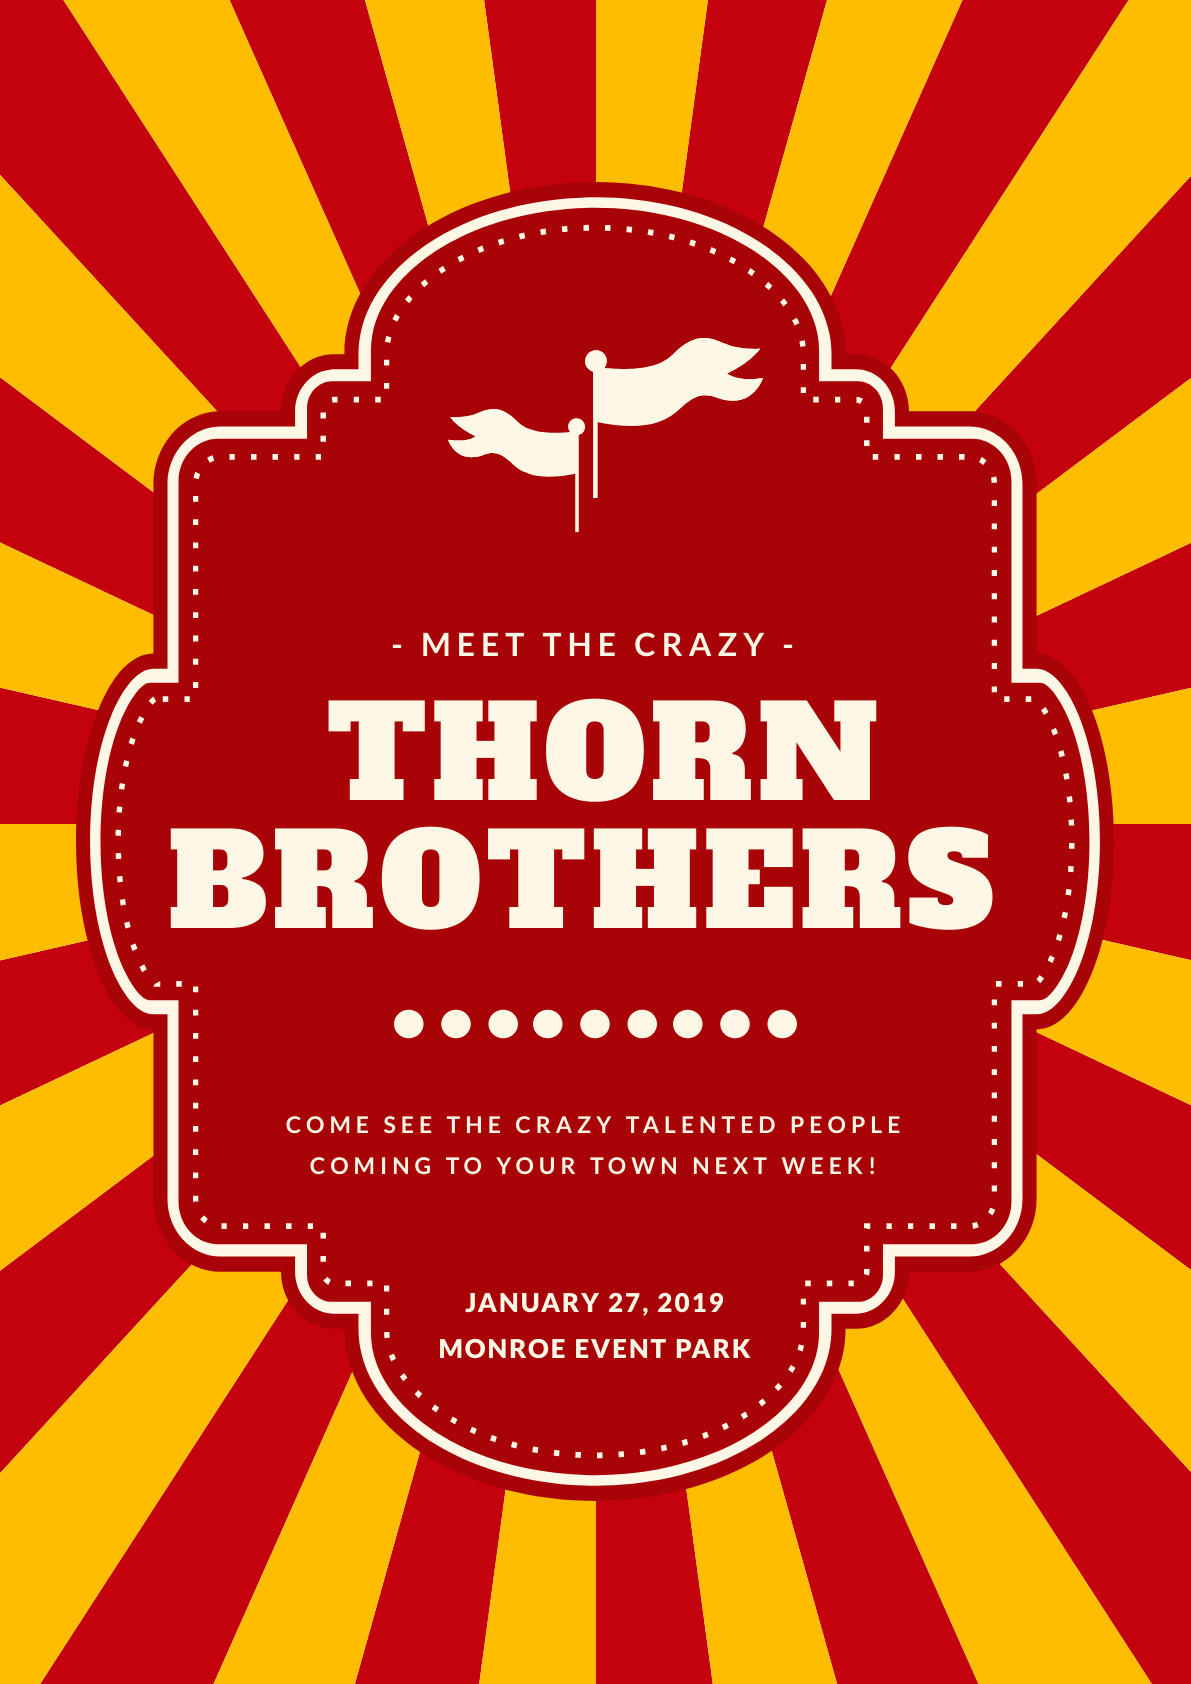 Thorn Brothers Circus – Poster Template